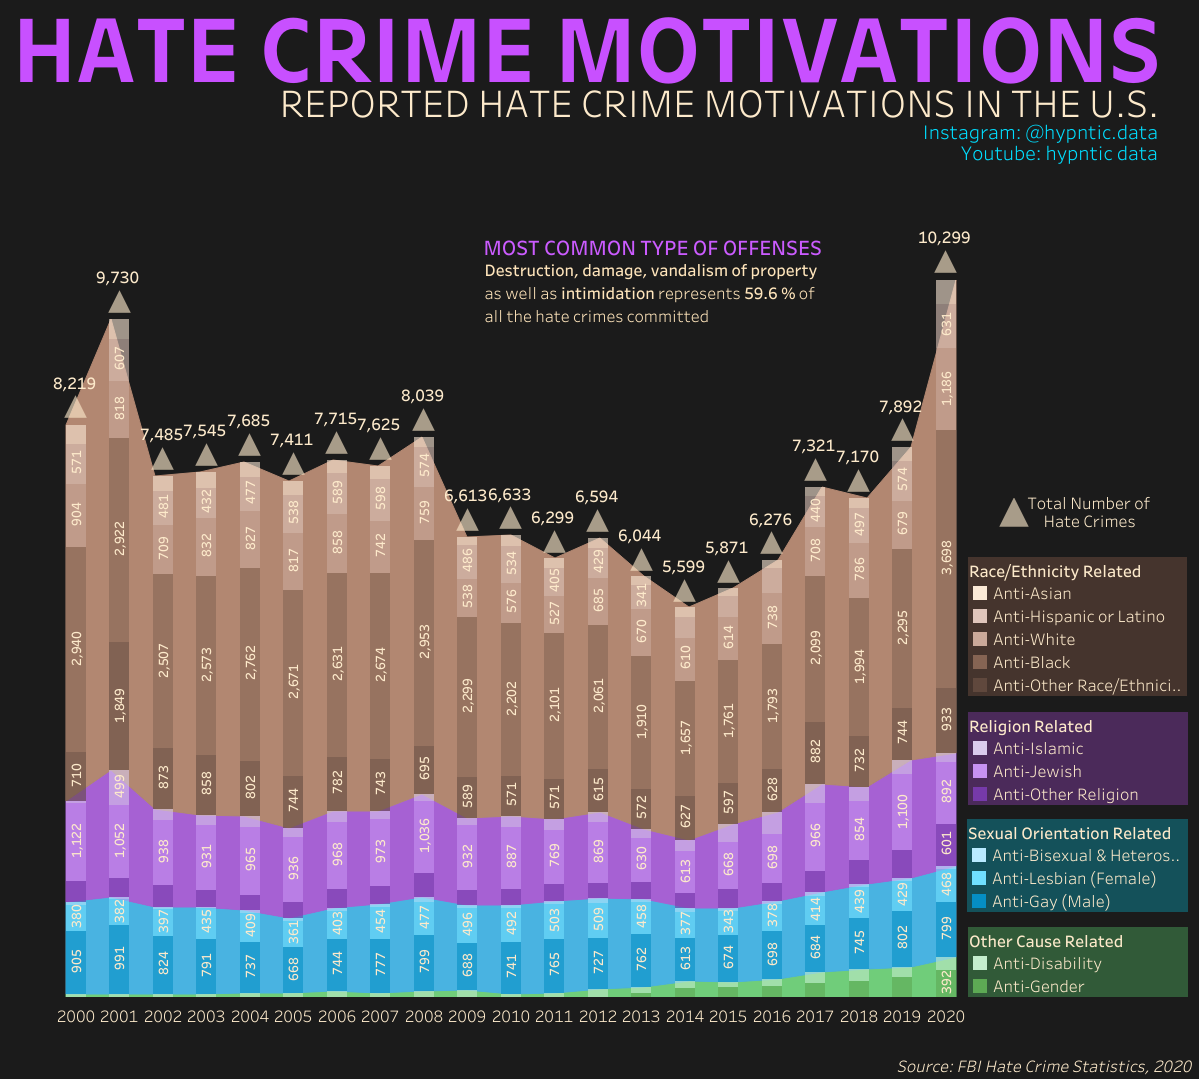 Two Decades of Hate Crimes in the U.S.